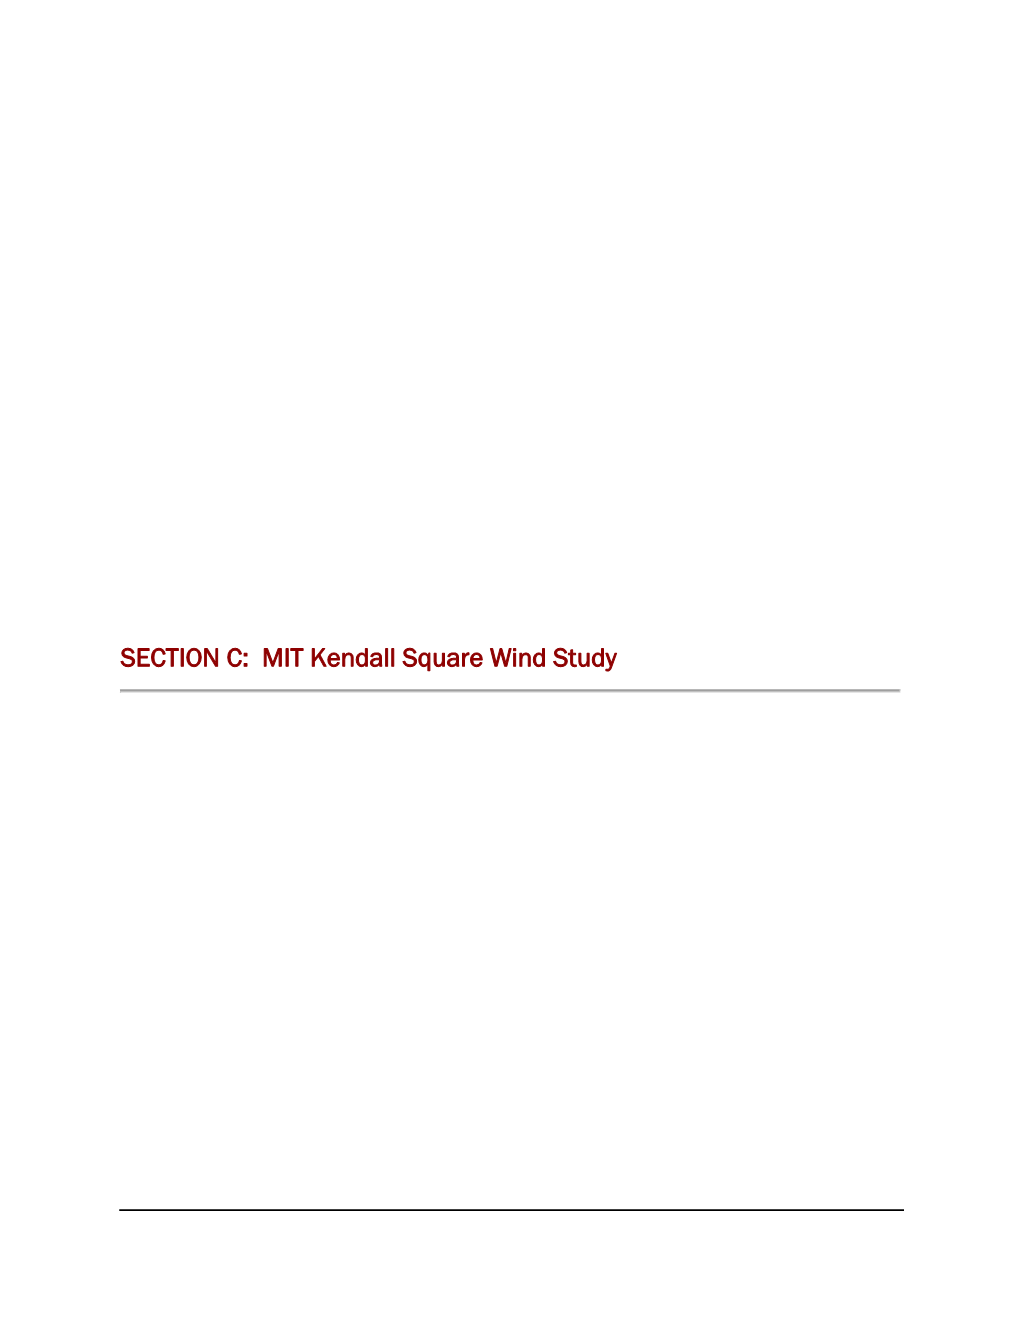 SECTION C: MIT Kendall Square Wind Study